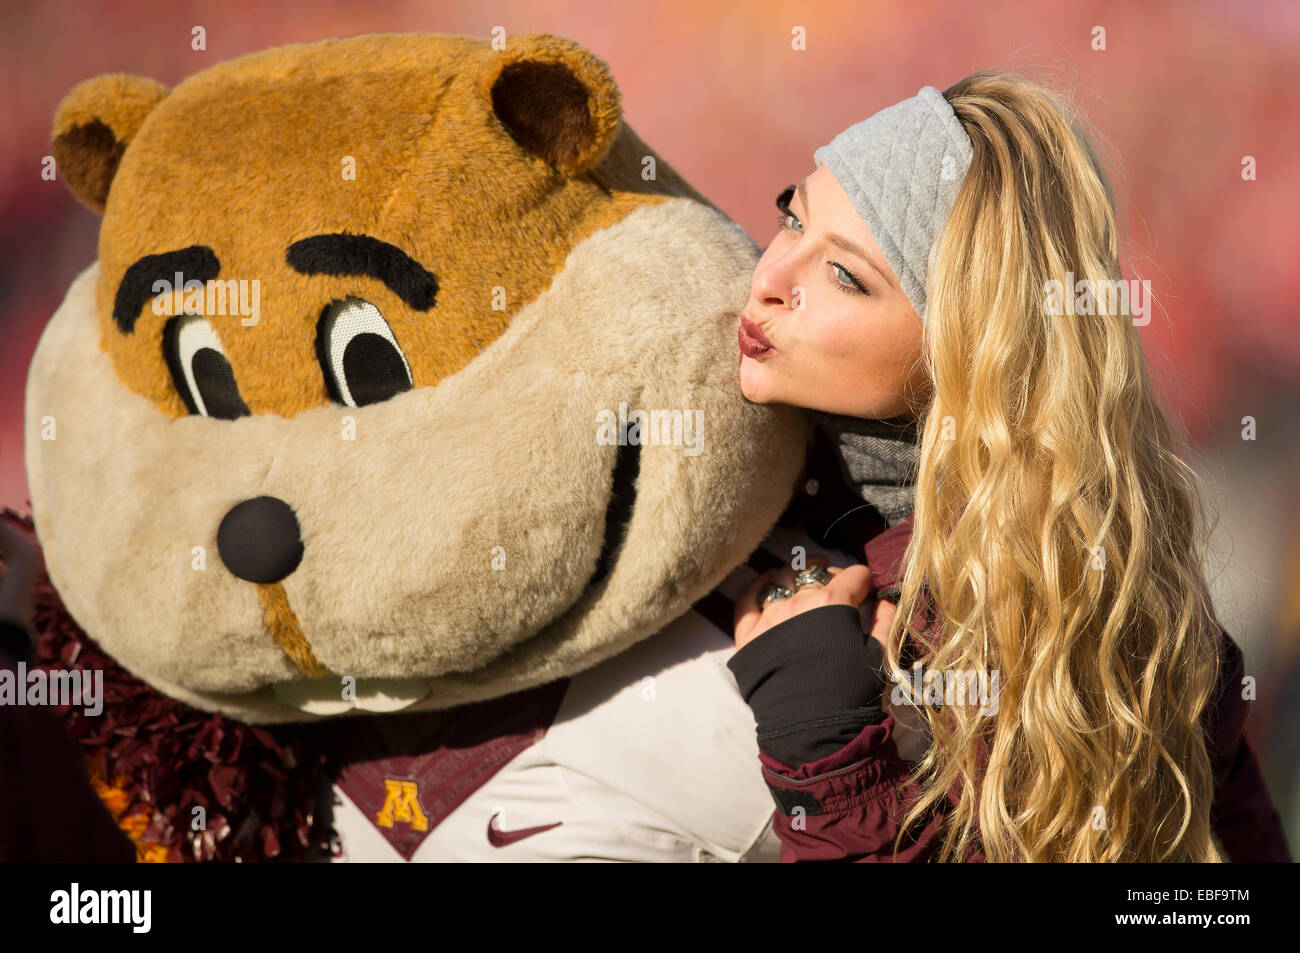 Madison, WI, USA. 29th Nov, 2014. Minnesota's mascot Goldy poses with a Minnesota cheerleader prior to the start of the NCAA Football game between the Minnesota Golden Gophers and the Wisconsin Badgers at Camp Randall Stadium in Madison, WI. John Fisher/CSM/Alamy Live News Stock Photo